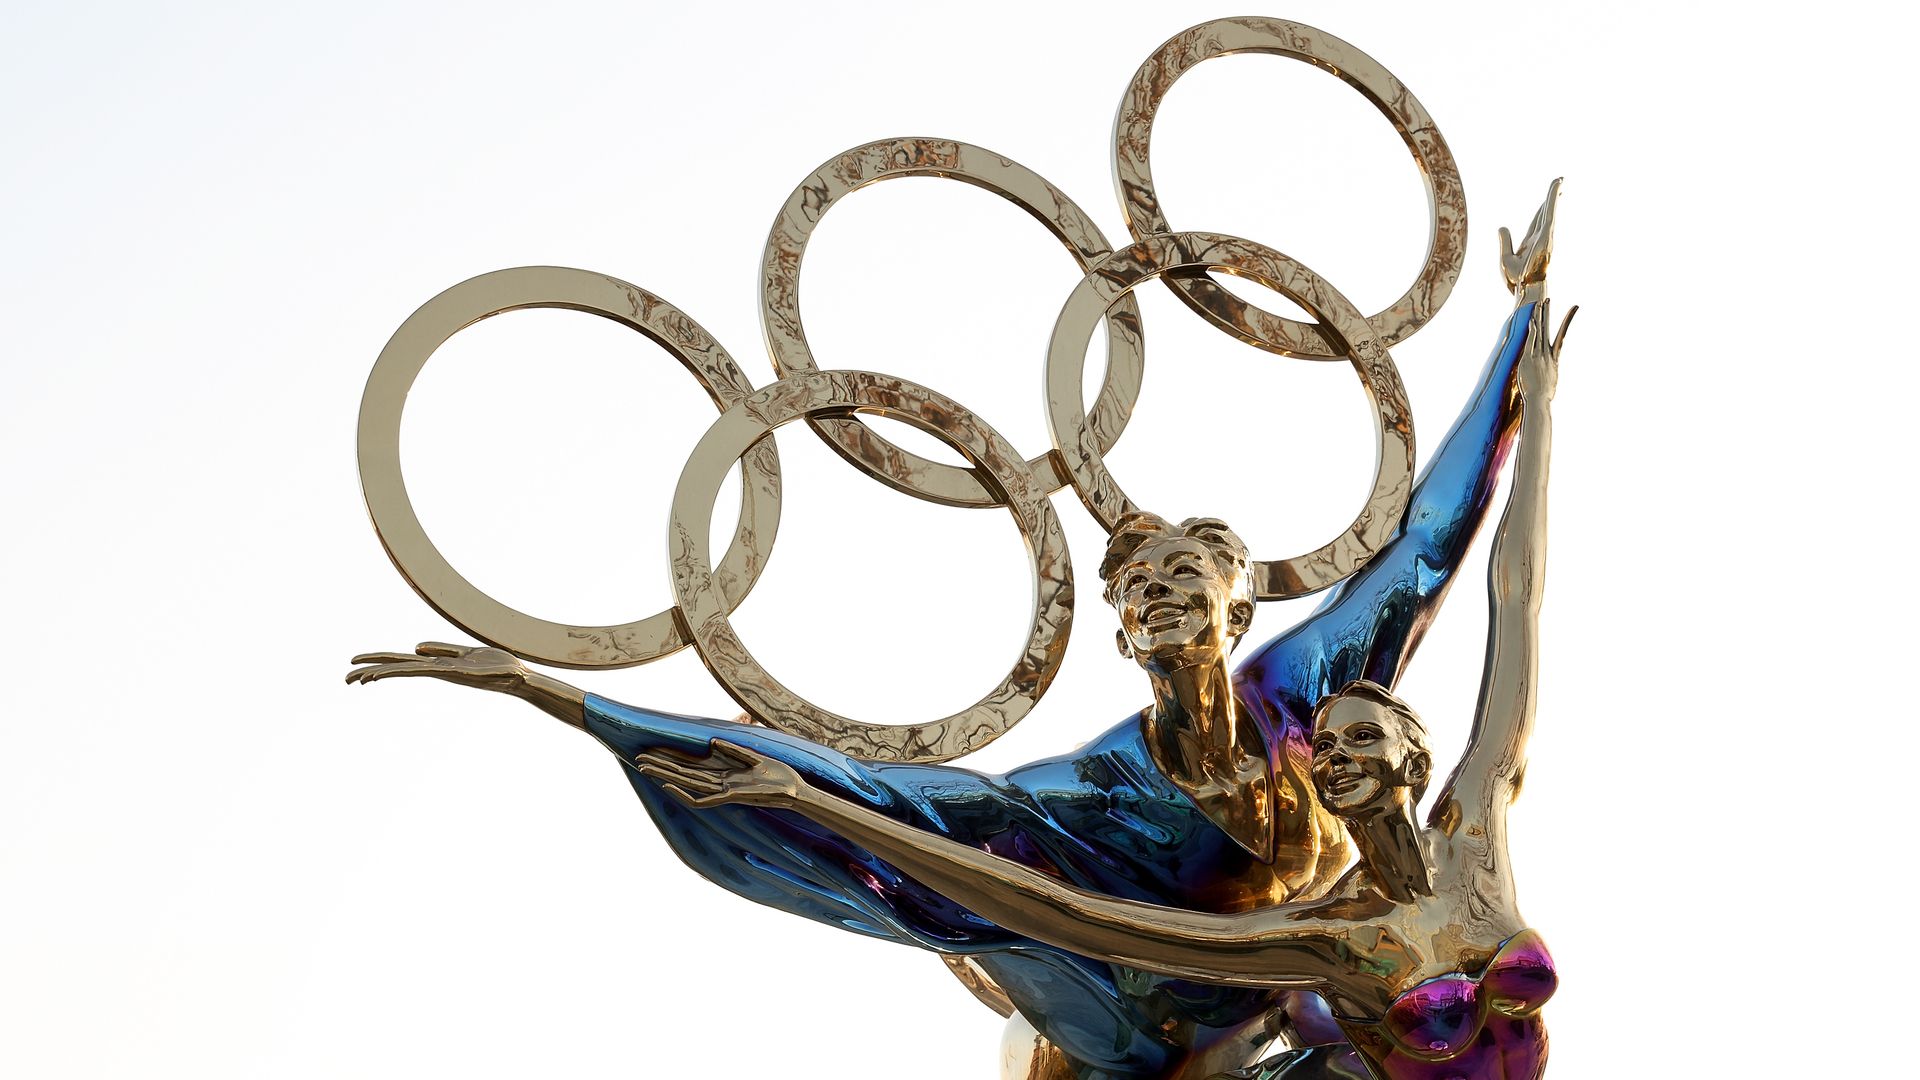 A sculpture of olympians with the olympics logo.